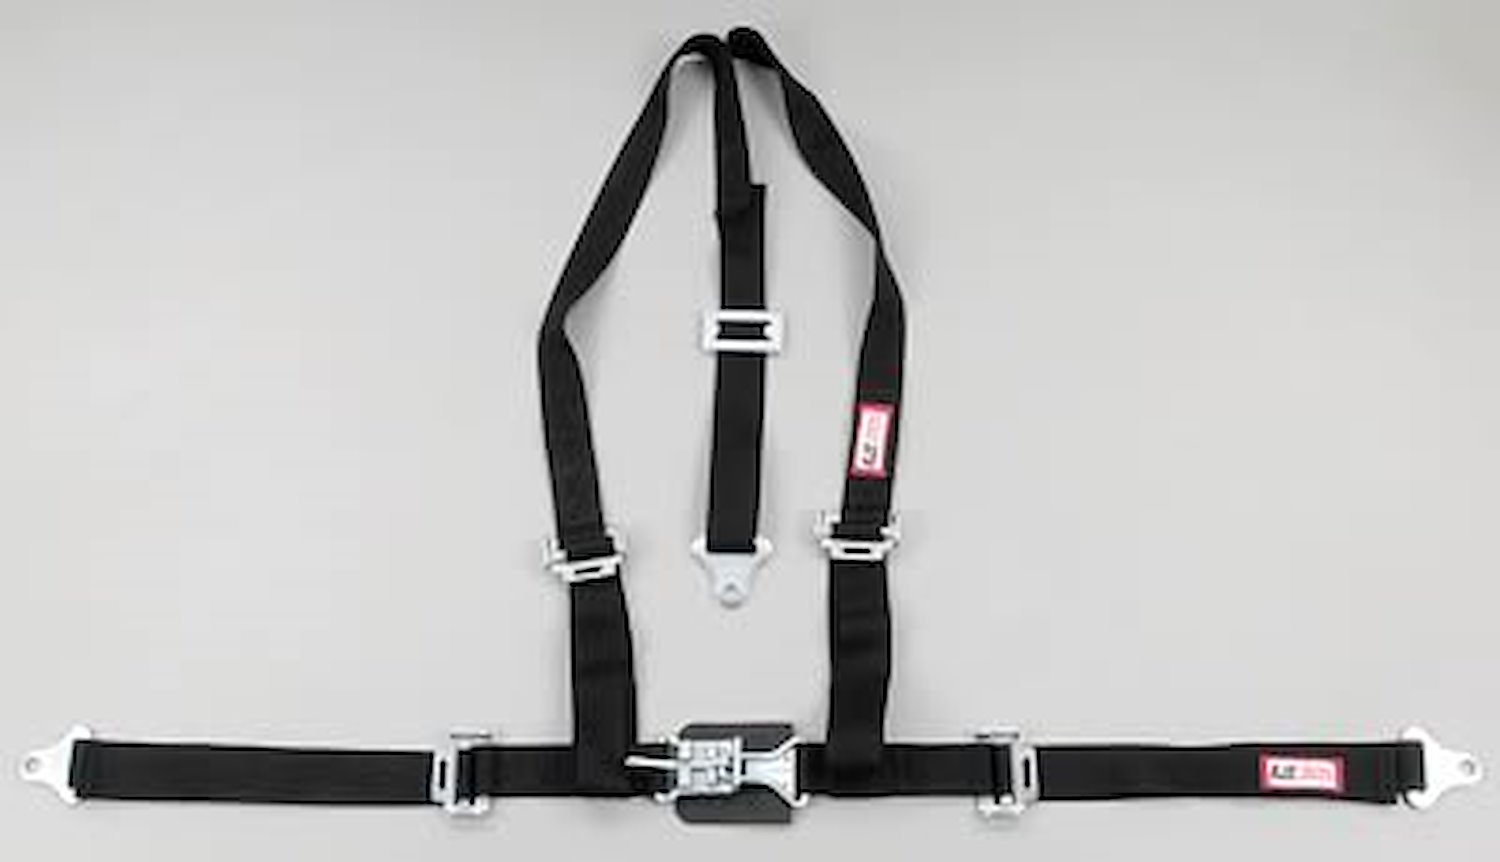 NON-SFI L&L HARNESS 2 PULL UP Lap Belt SEWN IN 2 S.H. INDIVIDUAL FLOOR Mount ALL WRAP ENDS HOT PINK